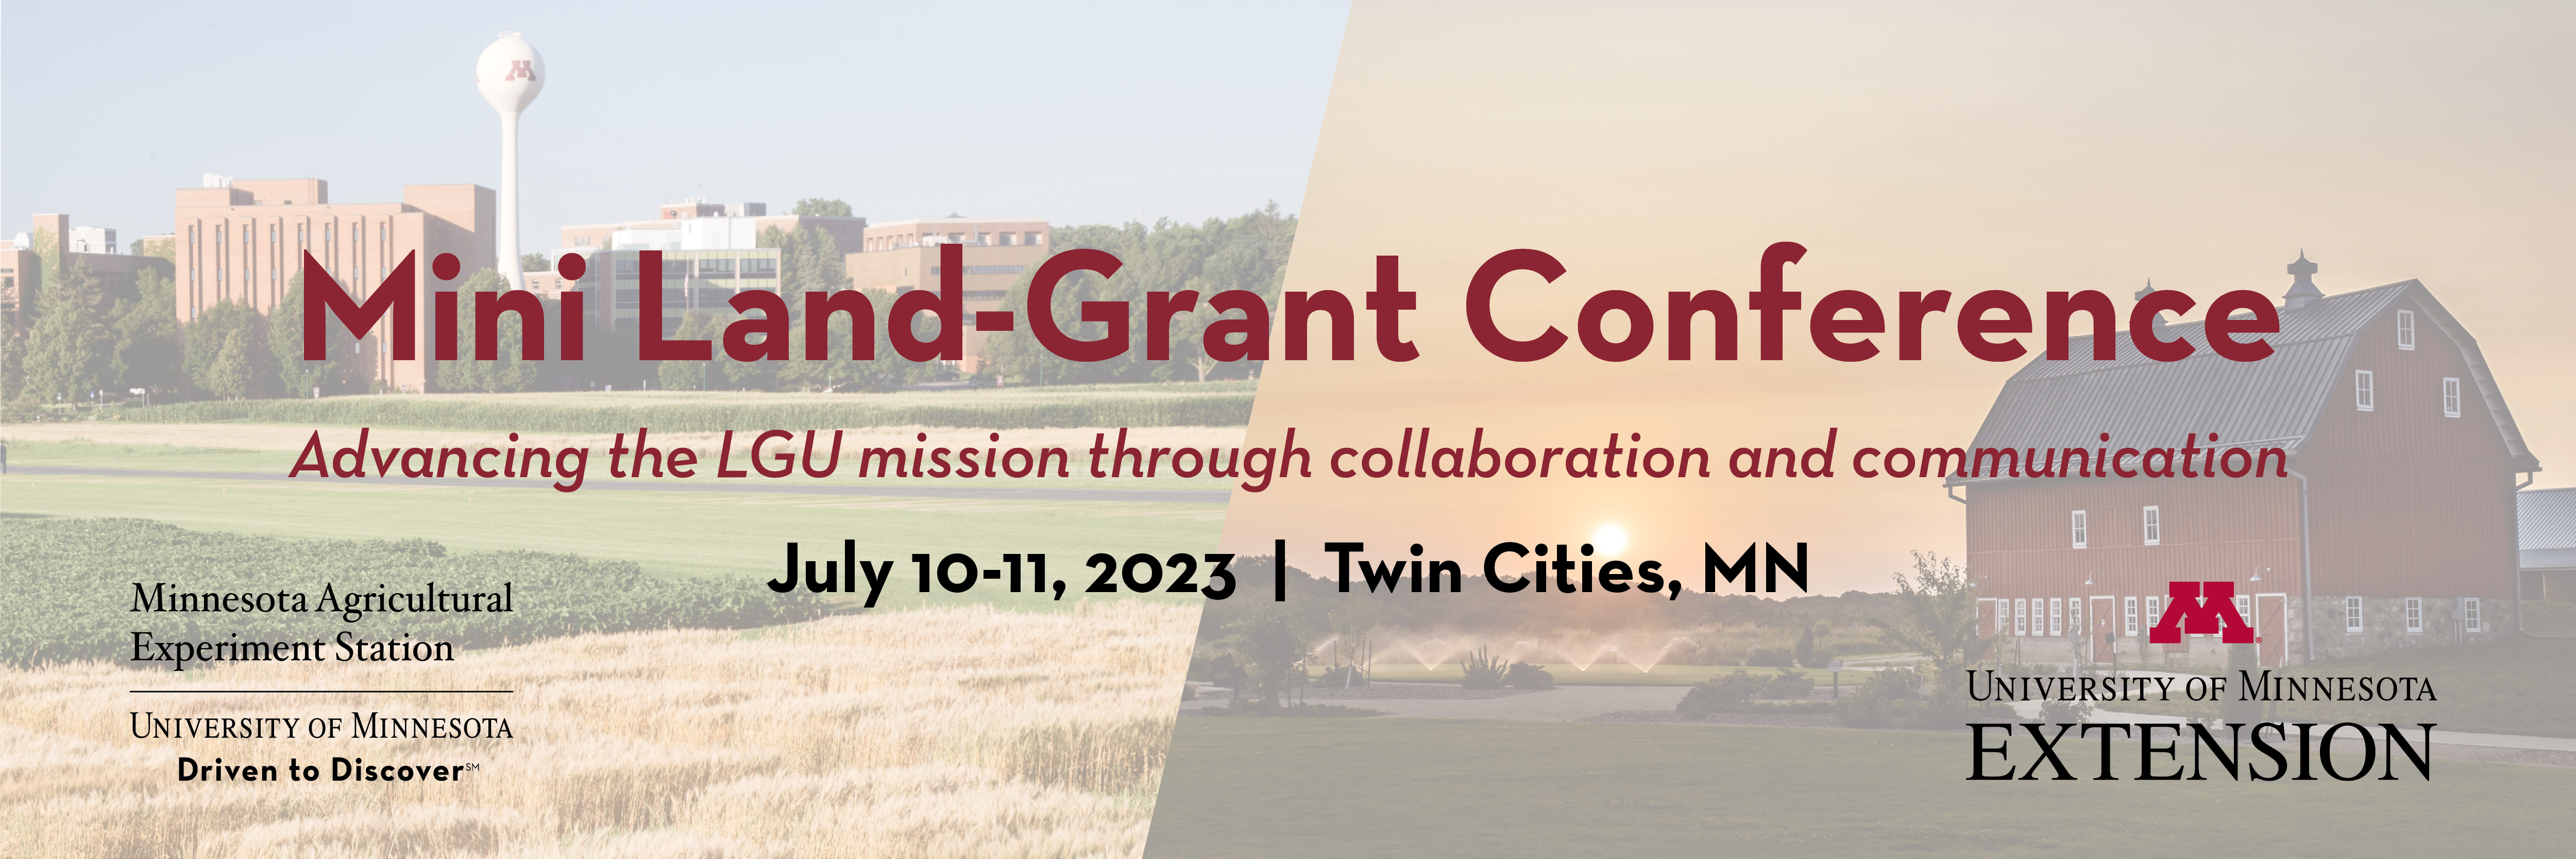 Text that says Mini Land-Grant Conference with photos of fields and a barn in the background